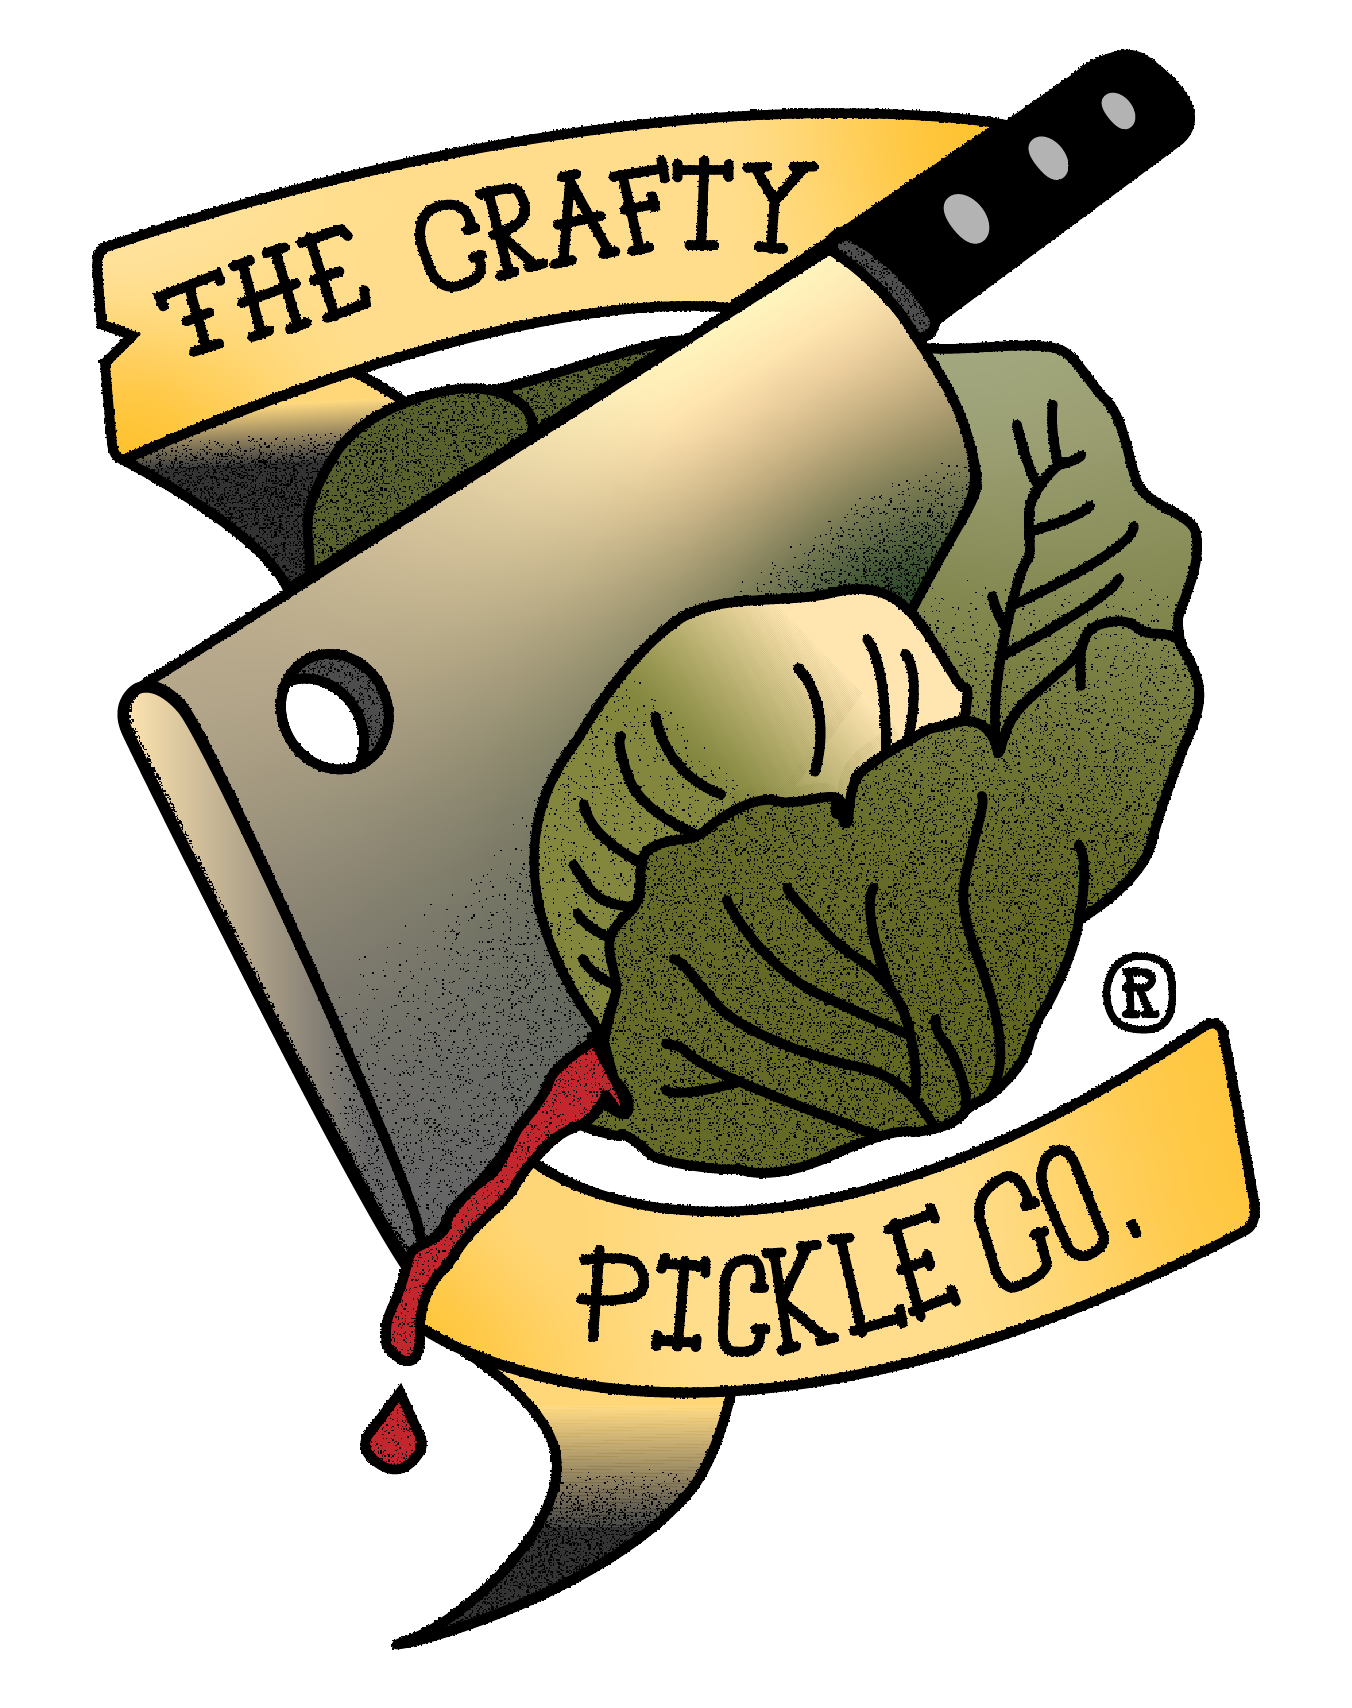 The Crafty Pickle Co. logo